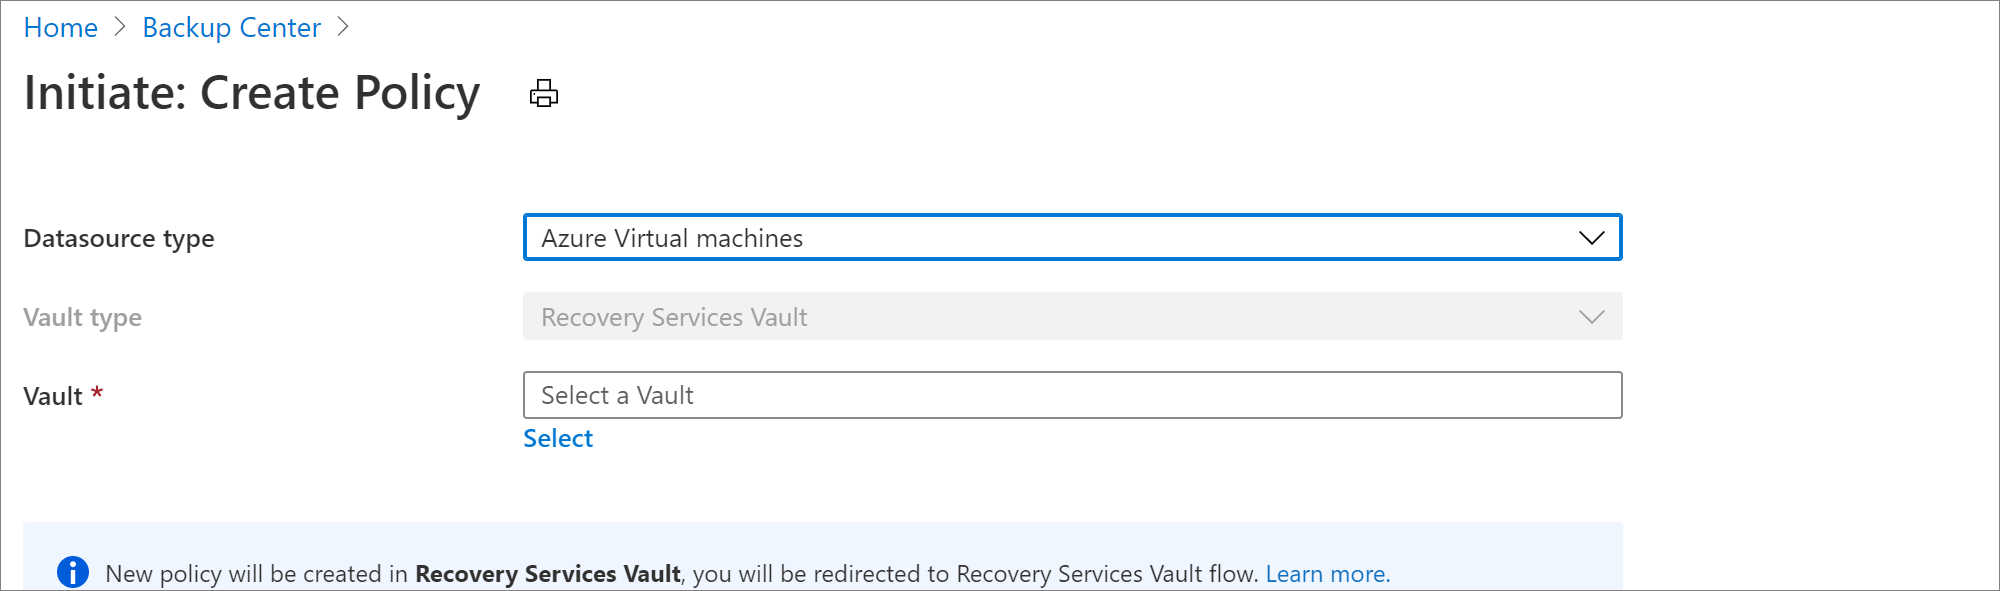 Select datasource for policy for VM backup